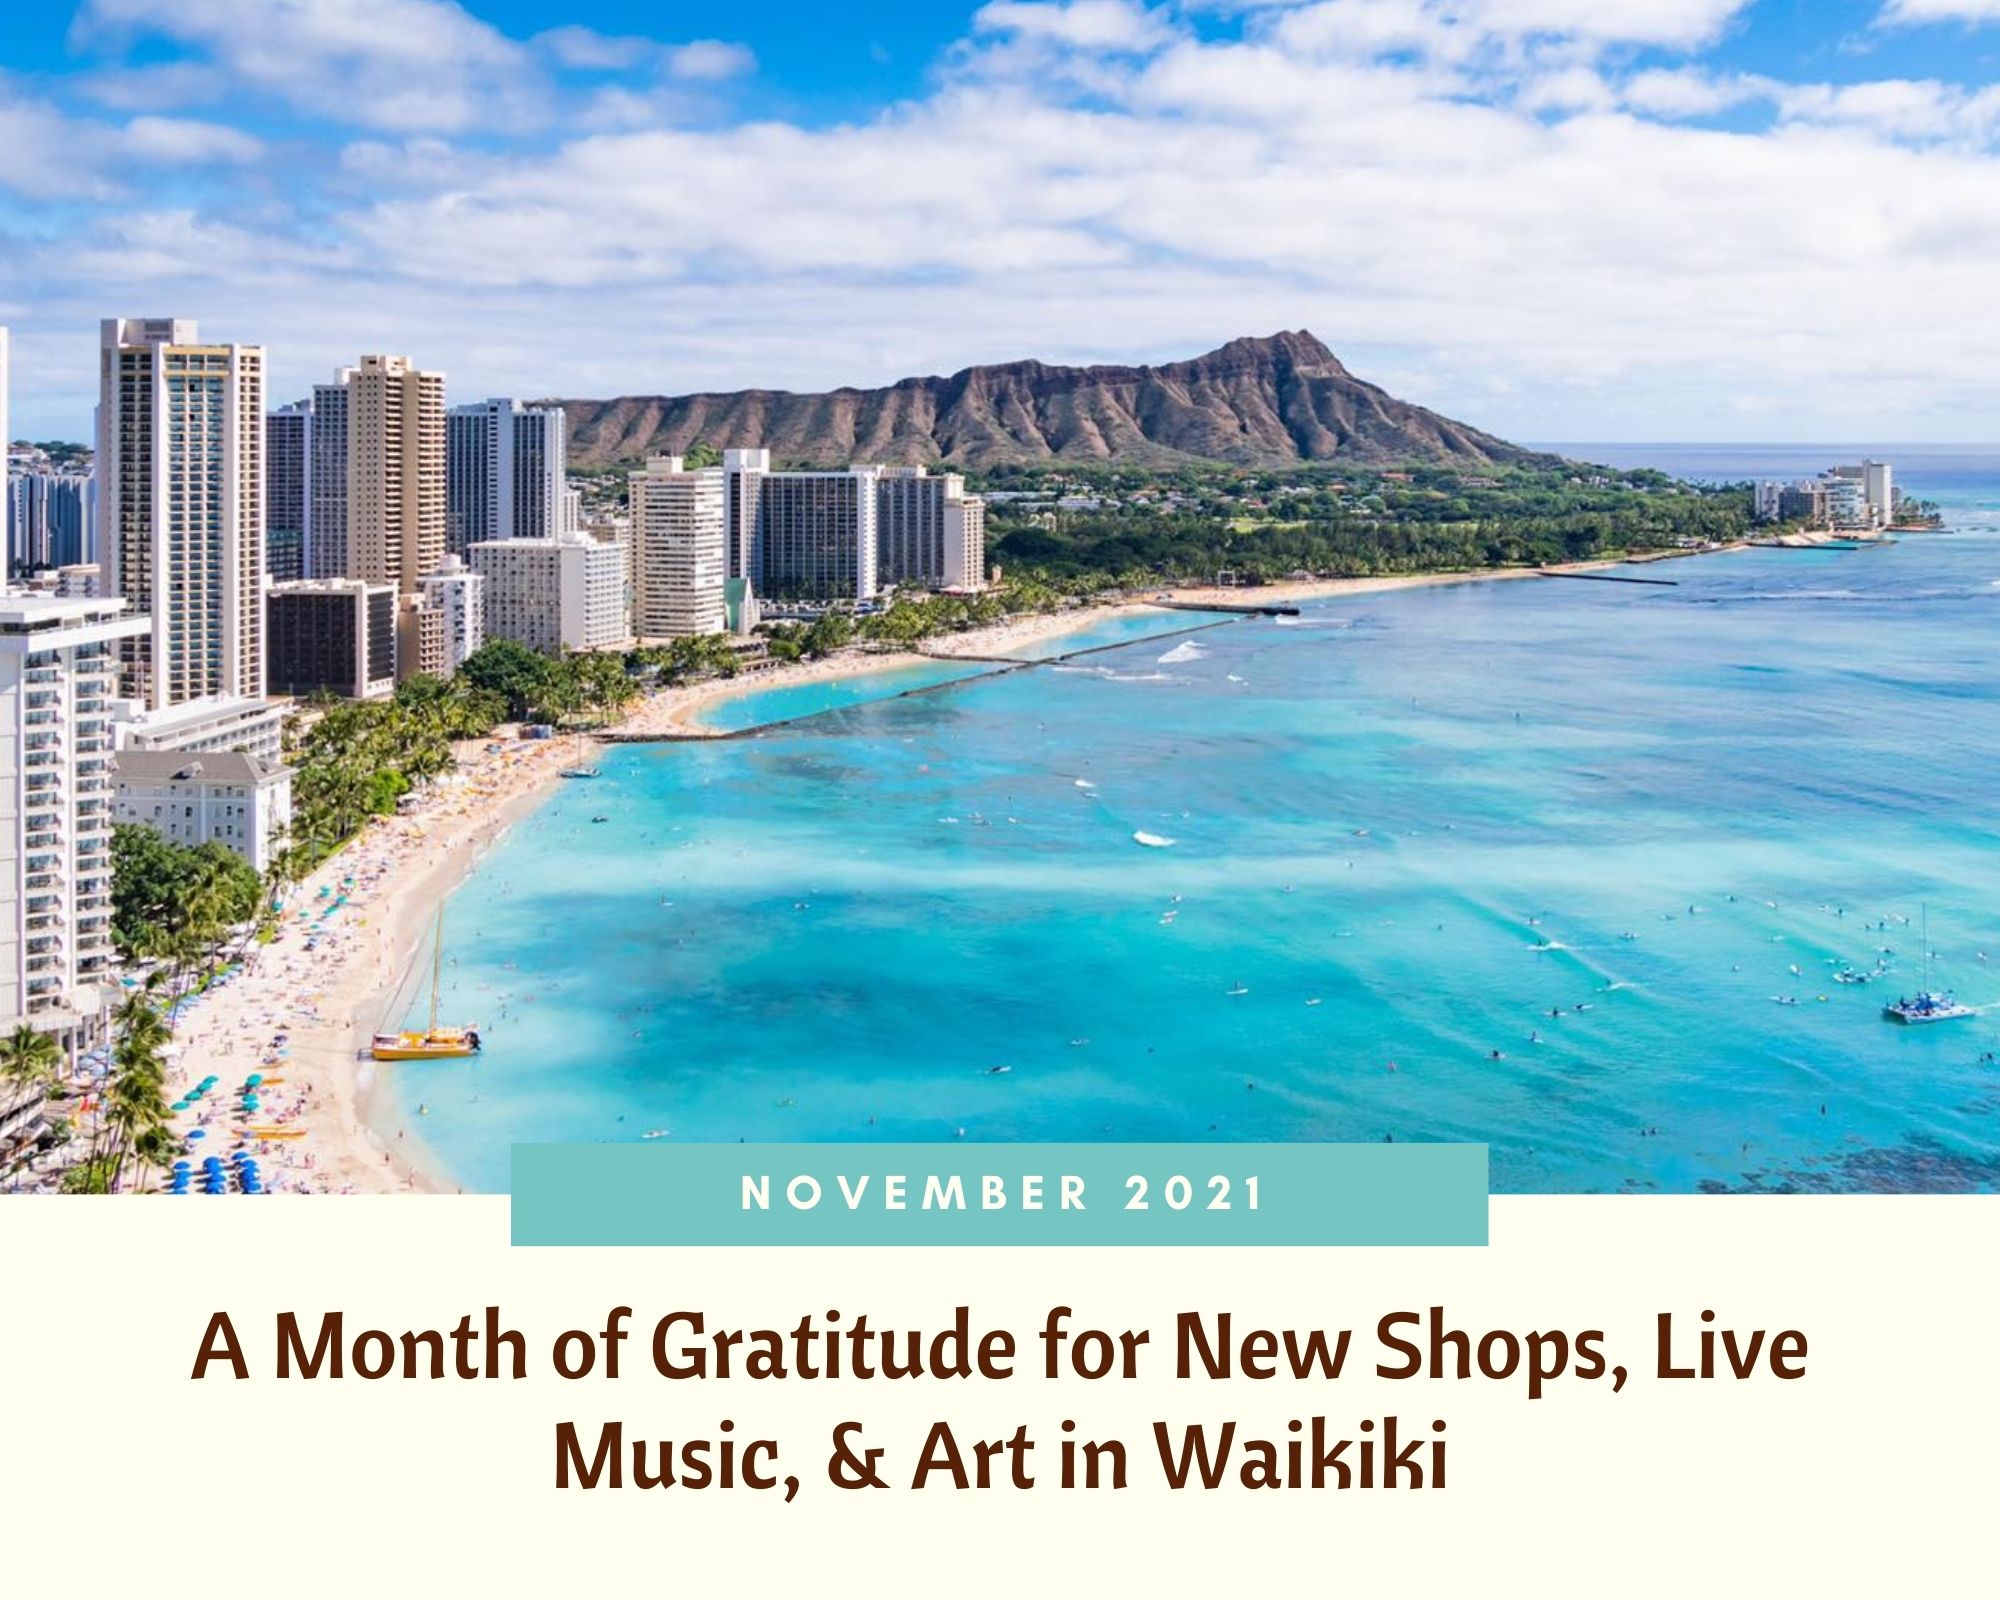 November 2021: A Month of Gratitude for New Shops, Live Music, & Art in Waikiki